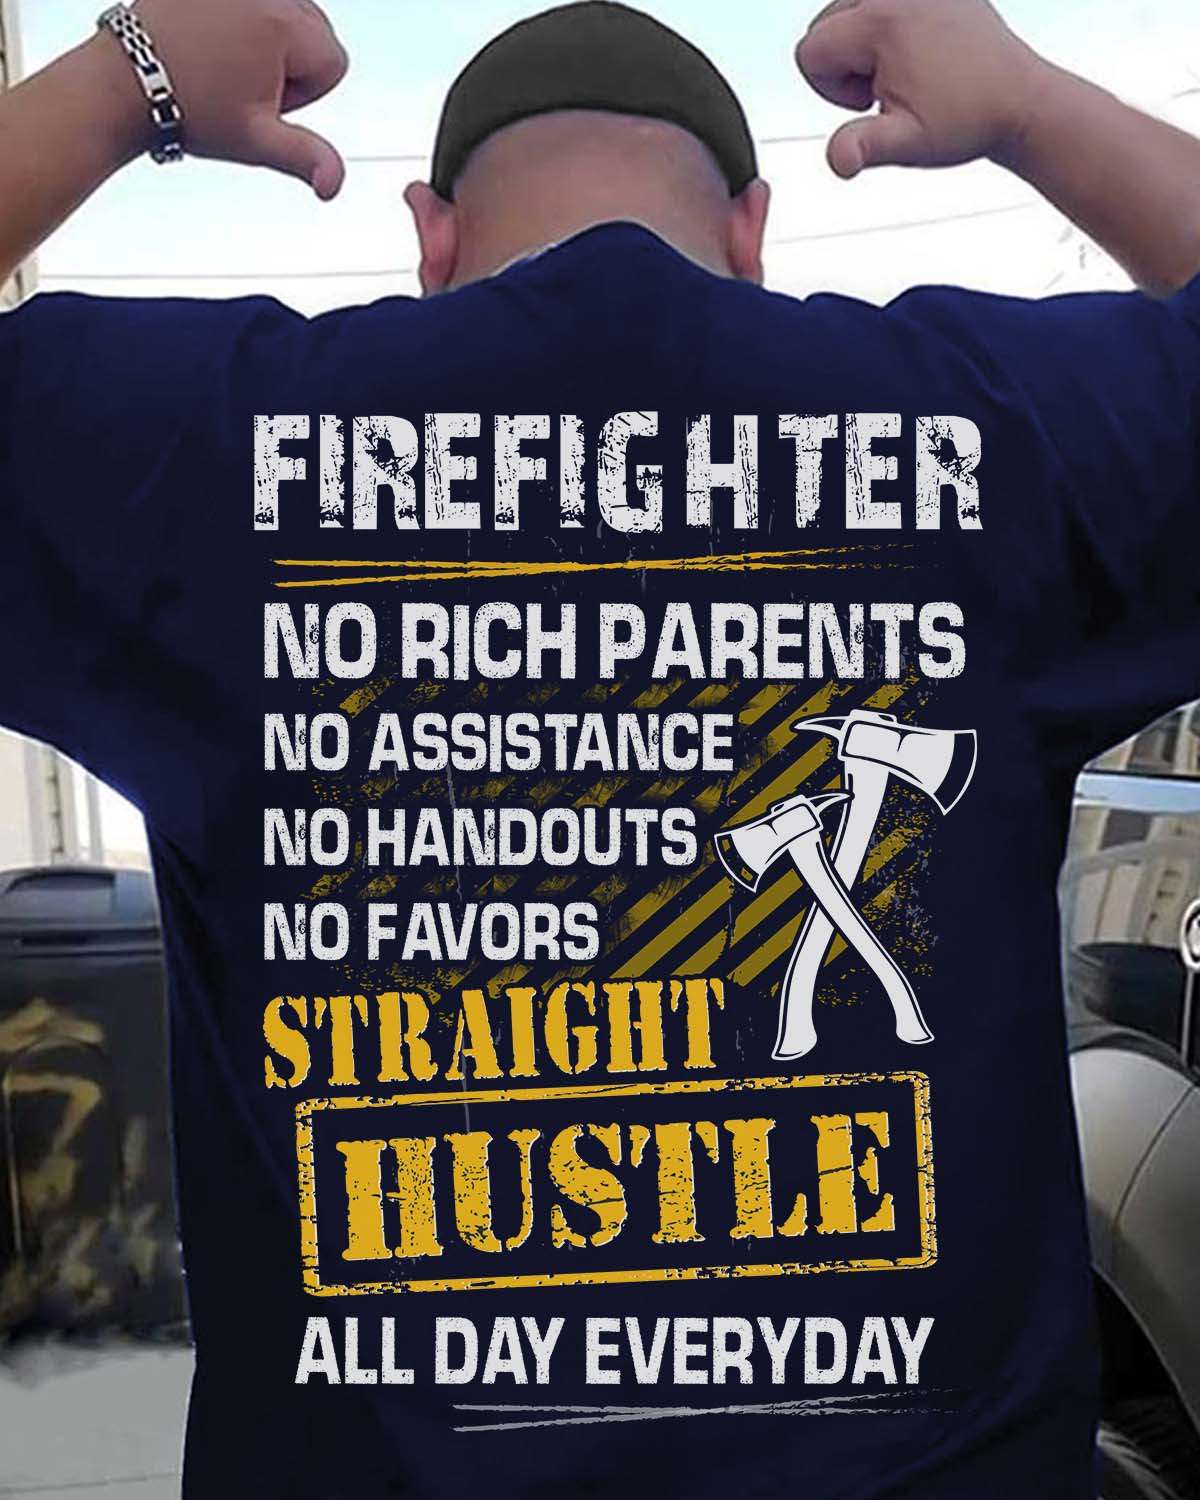 Firefighter Job - Firefighter no rich parents no assistance no handdouts straight hustle all day everyday